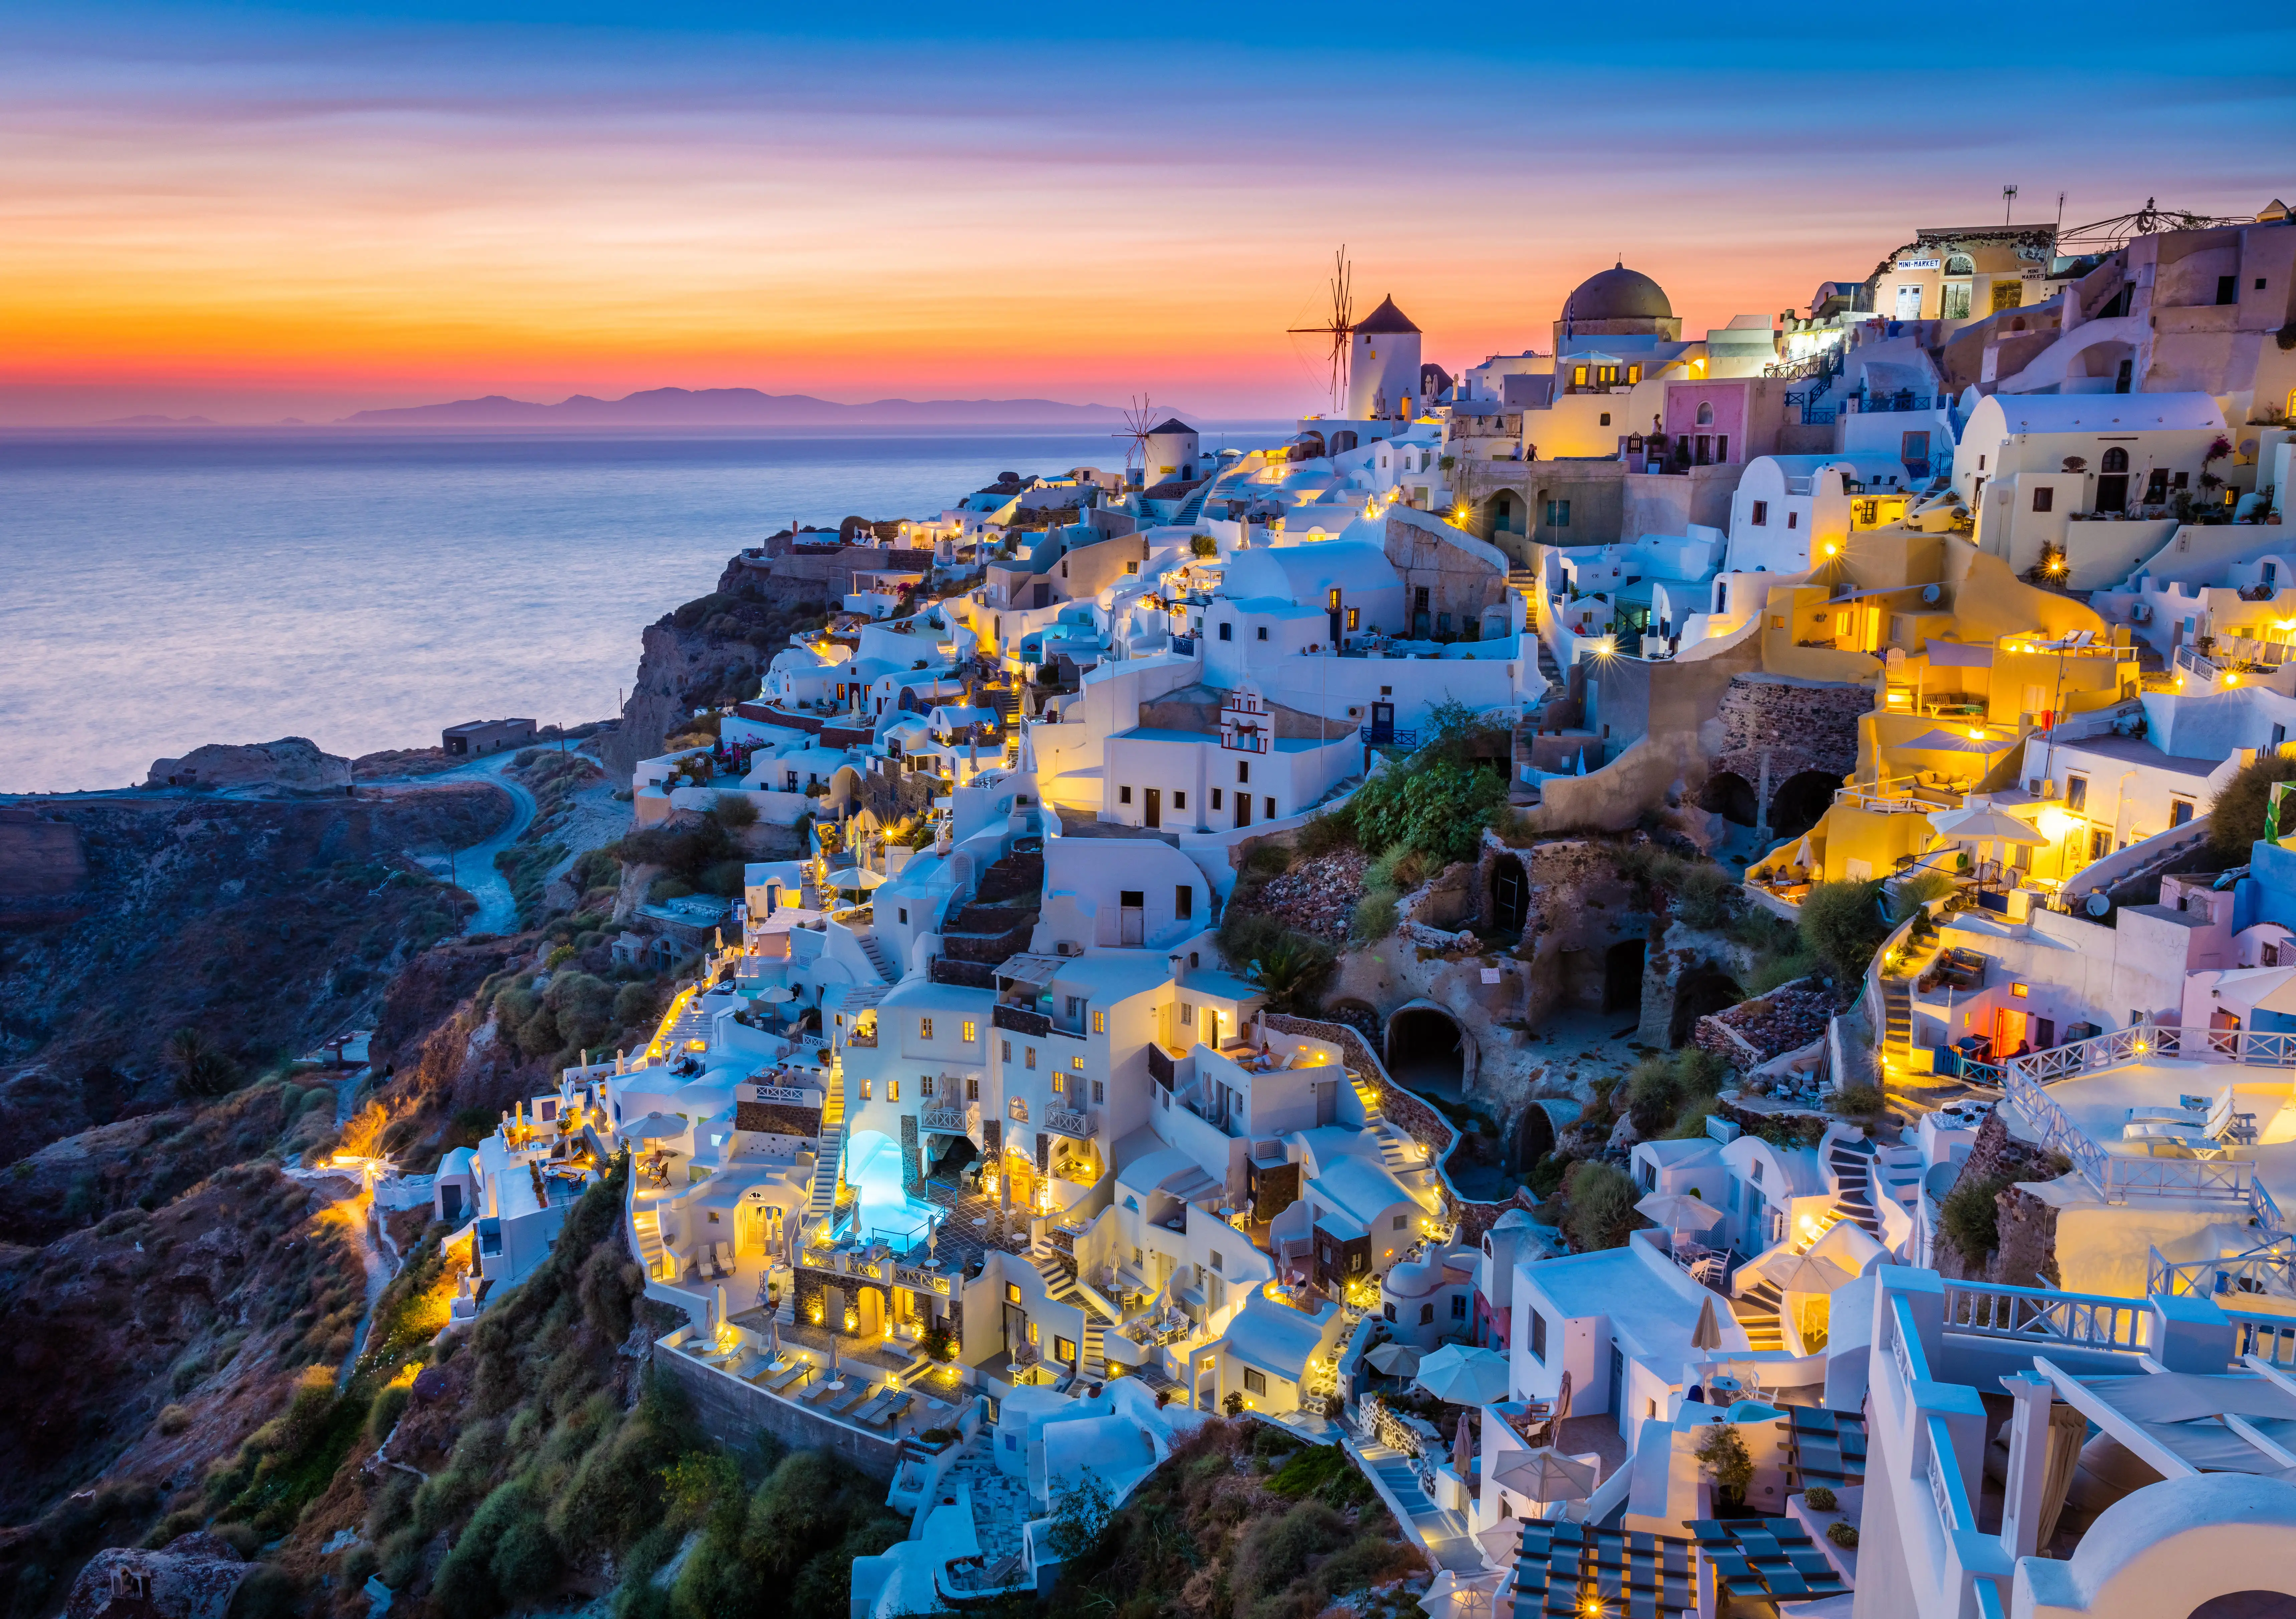 Iconic sunset in the town of Oia on the greek island Santorini (Thera).